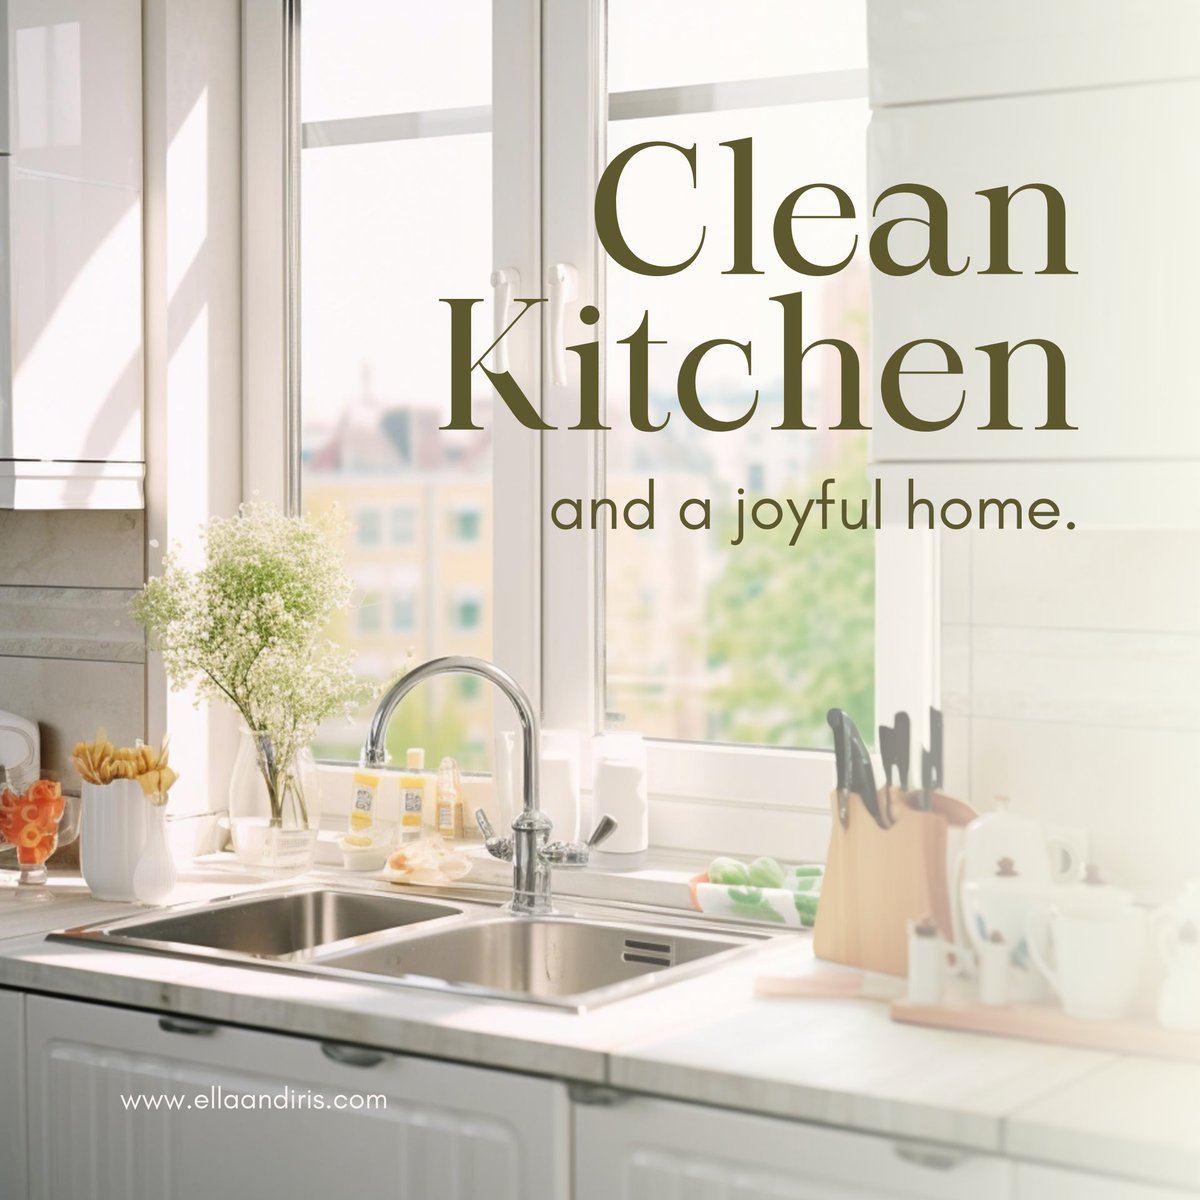 Today's mantra: Clean Kitchen and a joyful home! 🍽️✨ 
Celebrate No Dirty Dishes Day with Ella & Iris Home Clean House Scent to complete the fresh smelling kitchen you deserve!
#EllaandIrisHome #HomeFragrance #MoodBoosting #NoDirtyDishesDay #CleanKitchen